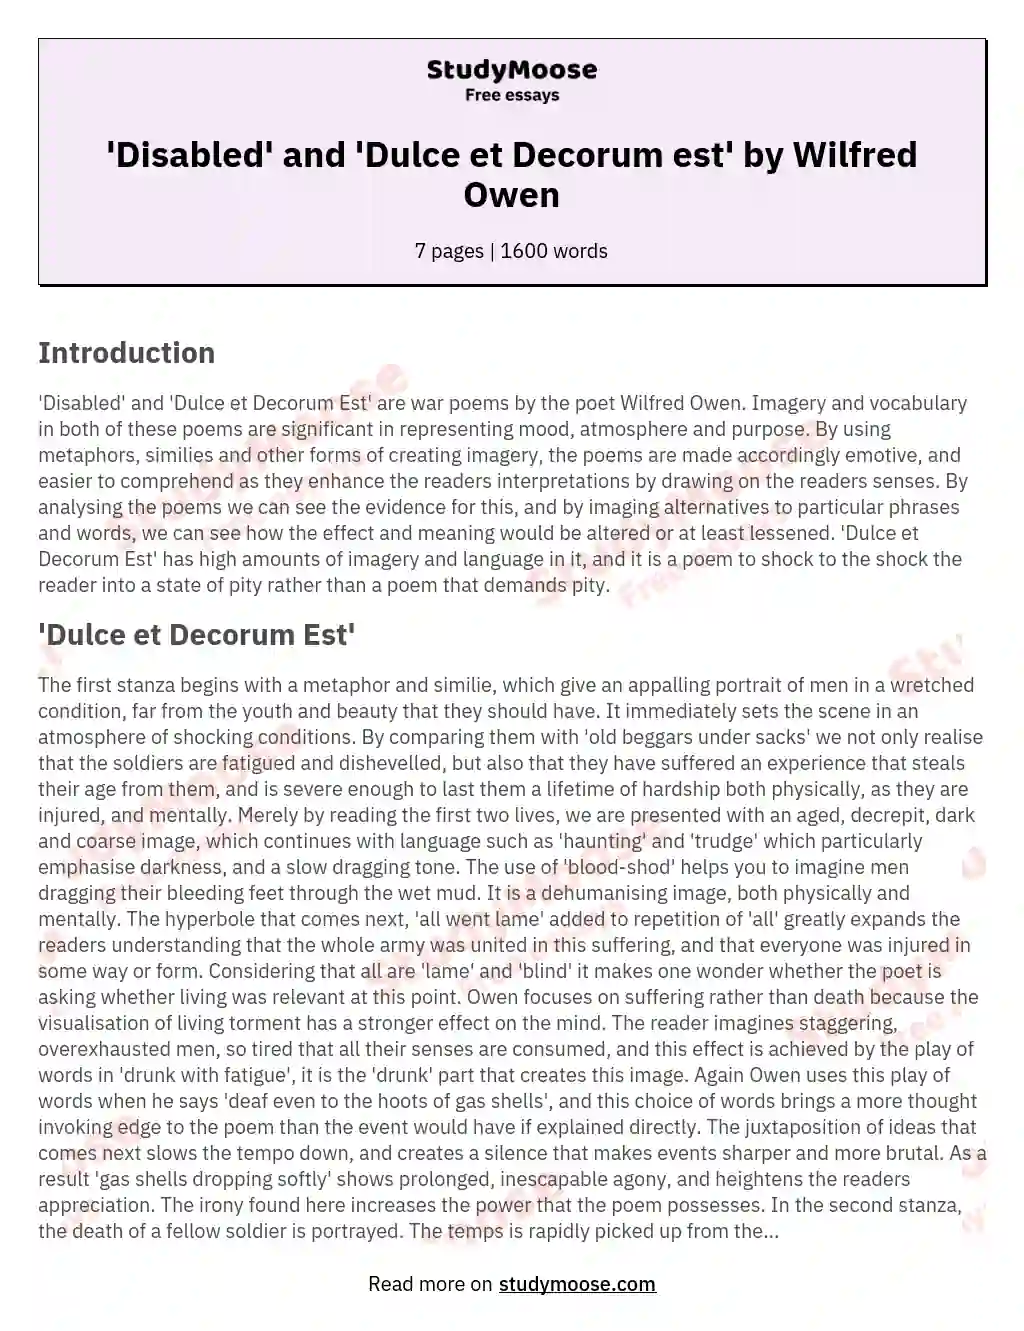 'Disabled' and 'Dulce et Decorum est' by Wilfred Owen